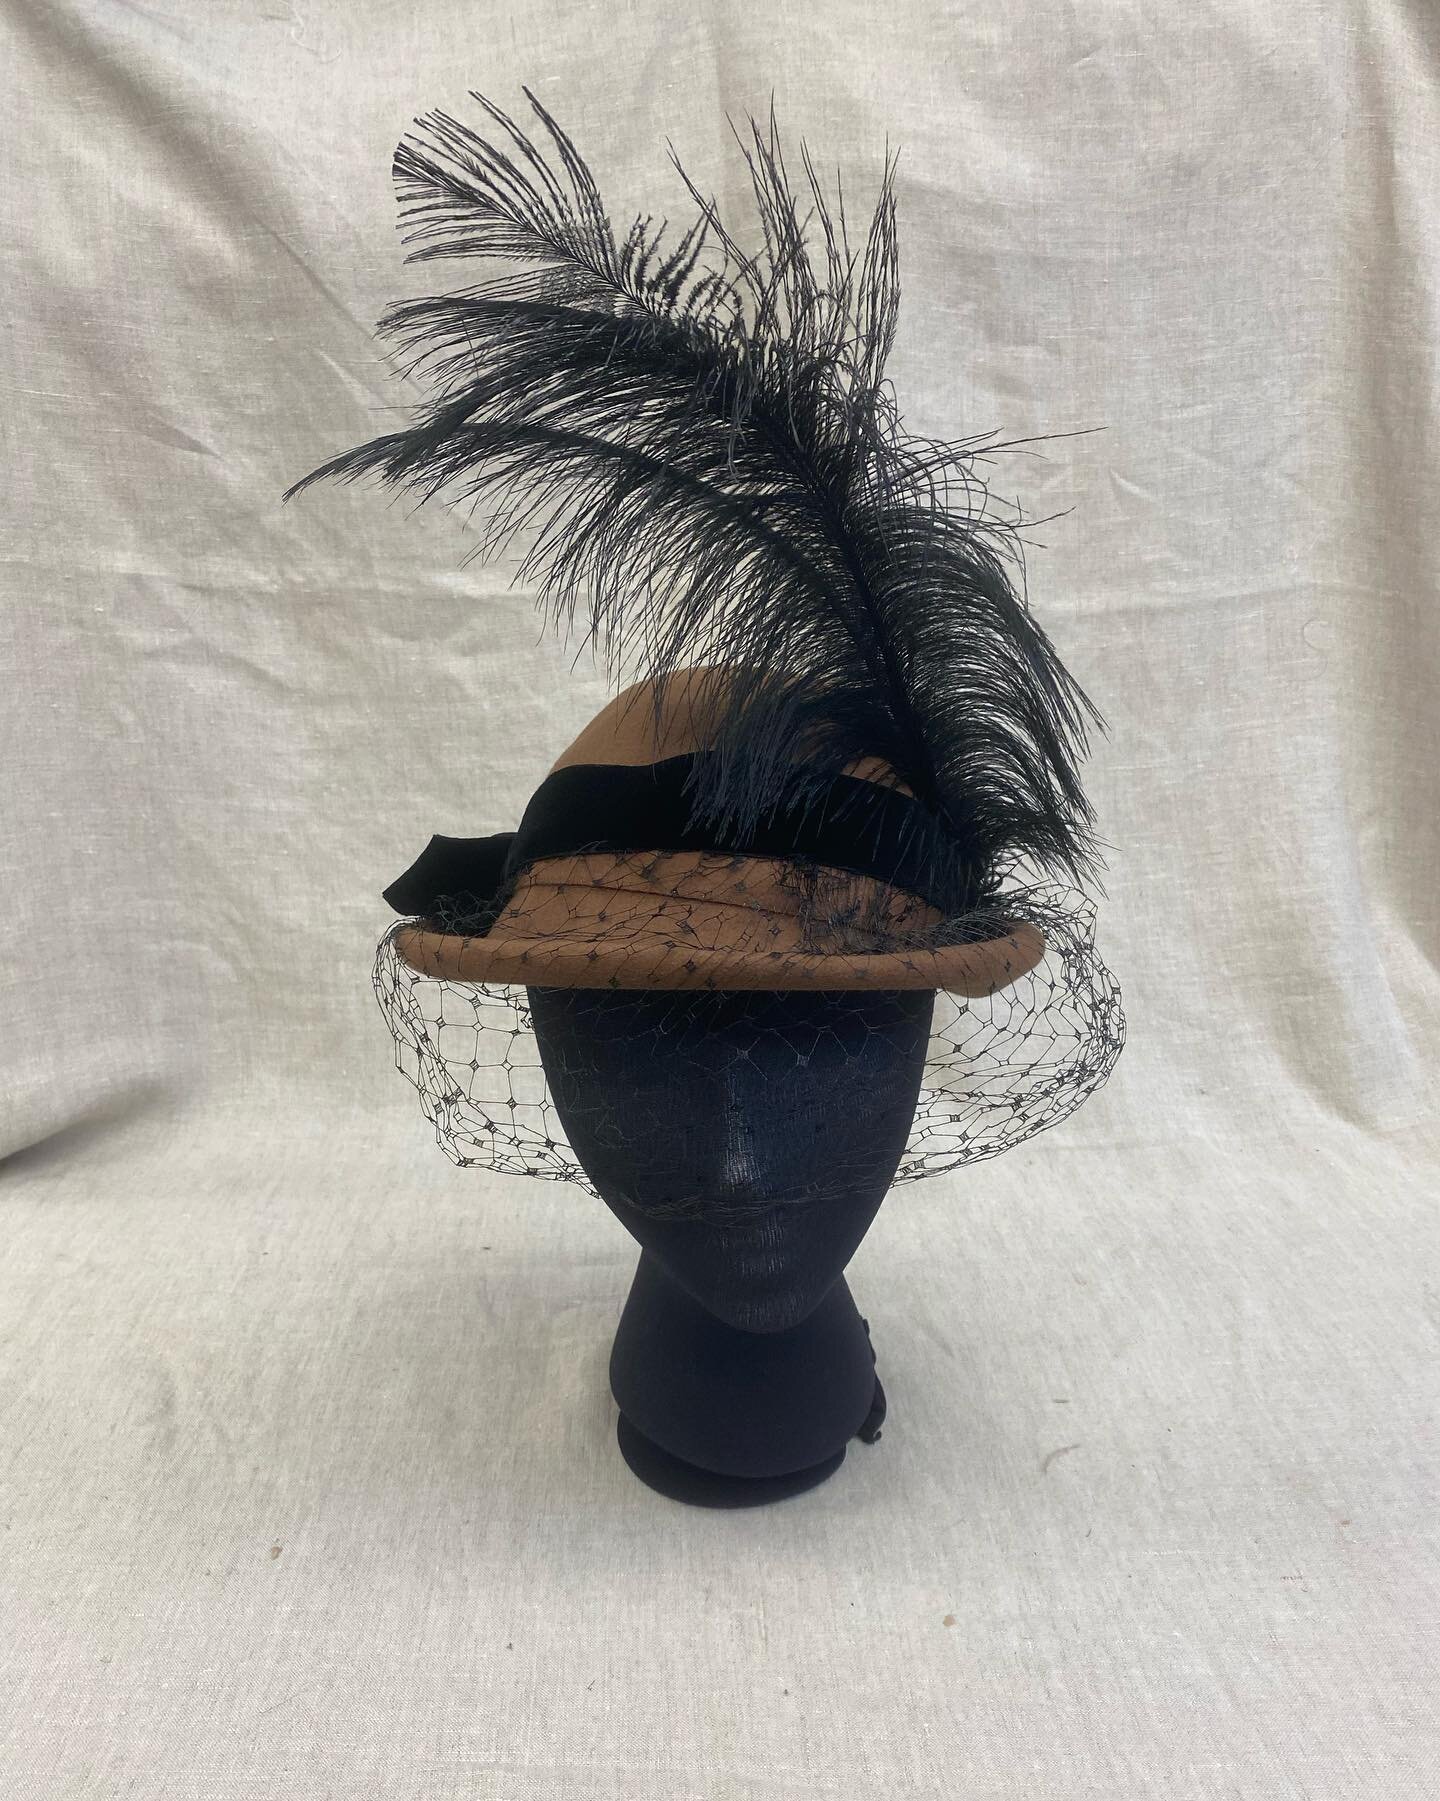 The Kentucky Derby, which is usually held in May, was rescheduled to this coming Saturday, September 5th due to COVID, so in typical Casaday fashion, we are featuring one of our favorite Derby hats!
 
This adorable hat would look rather understated a